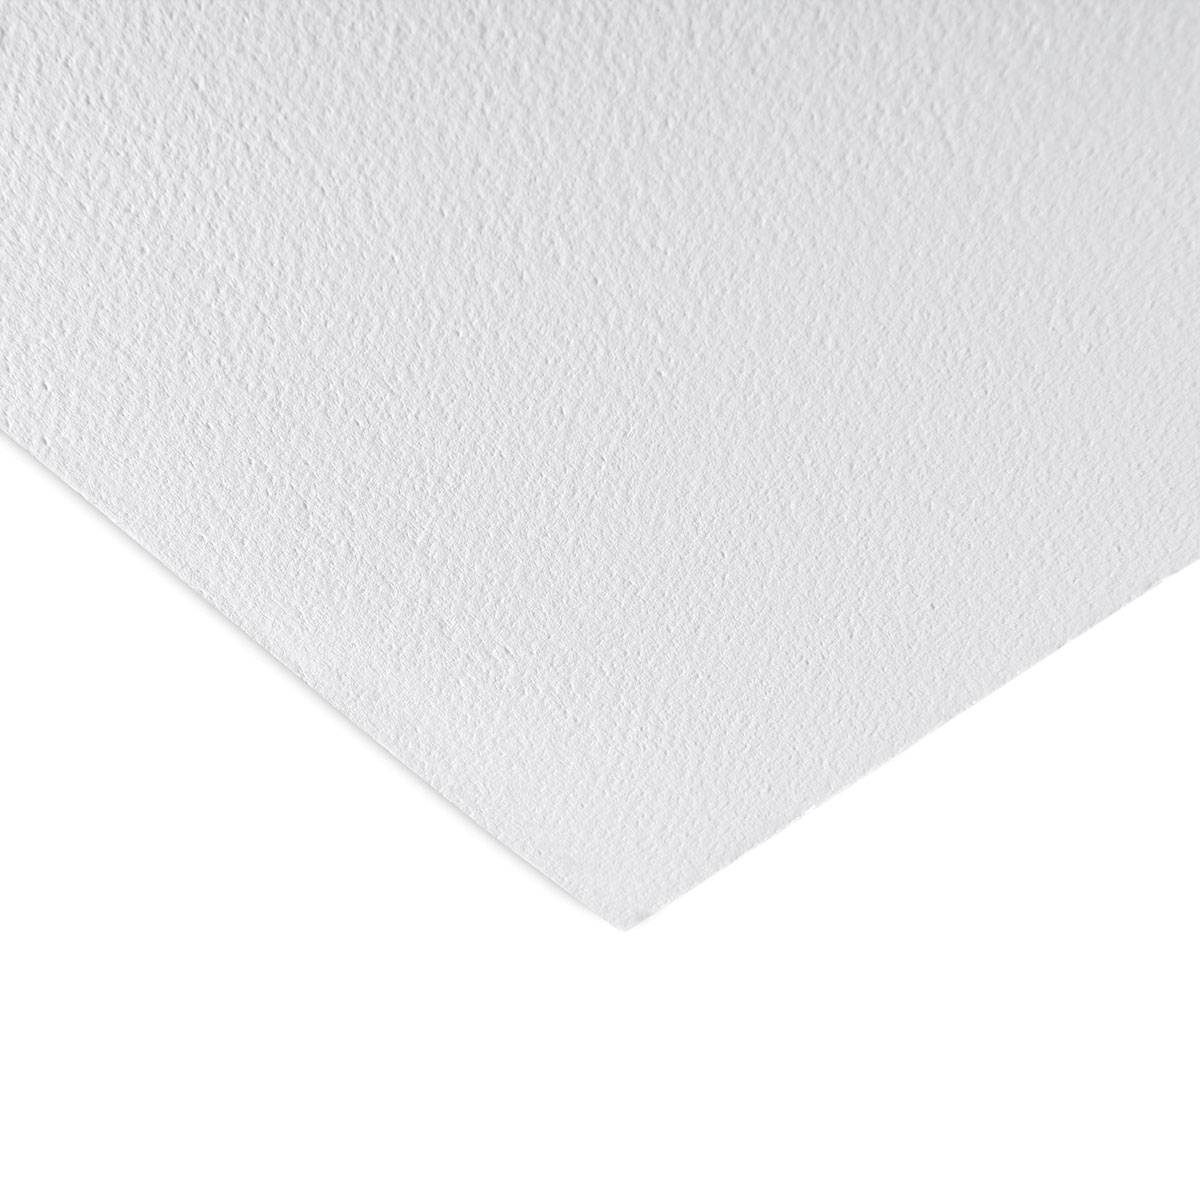 Canson Heritage Cold Press 300lb Paper Sheet - 22 x 30